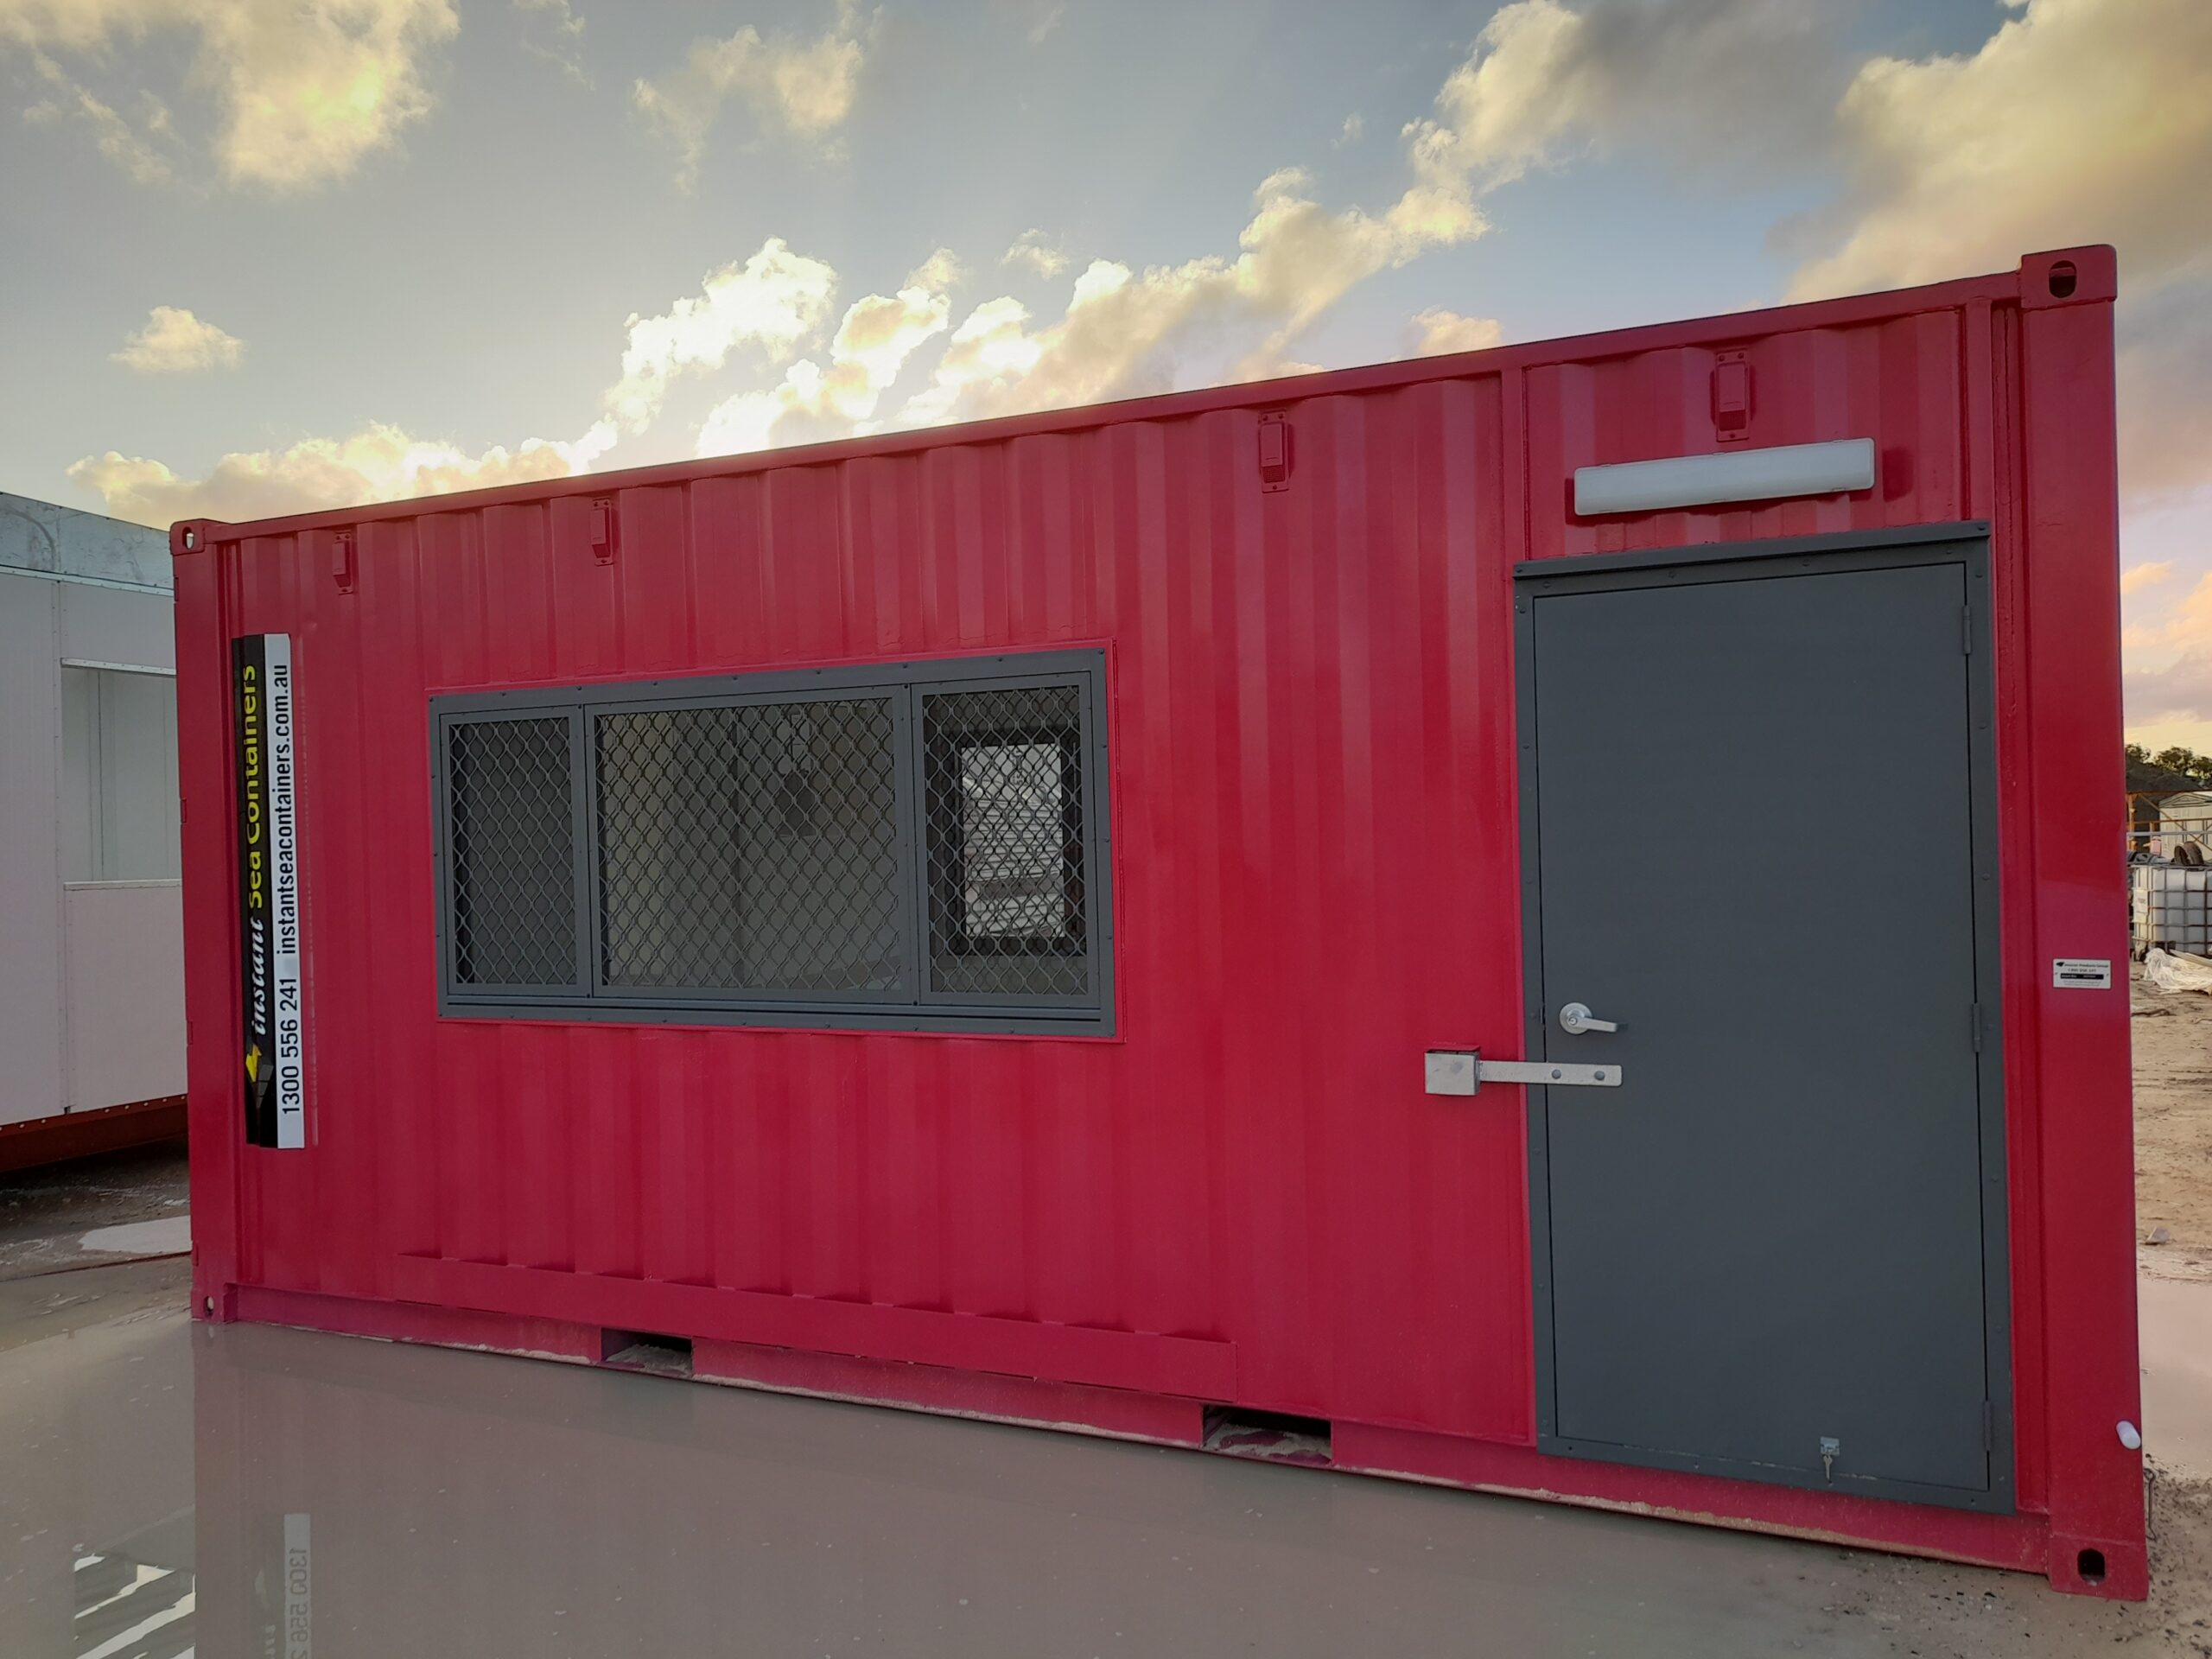 Red shipping container modified into an office with large security windows and a gray door, set against a cloudy sky background.